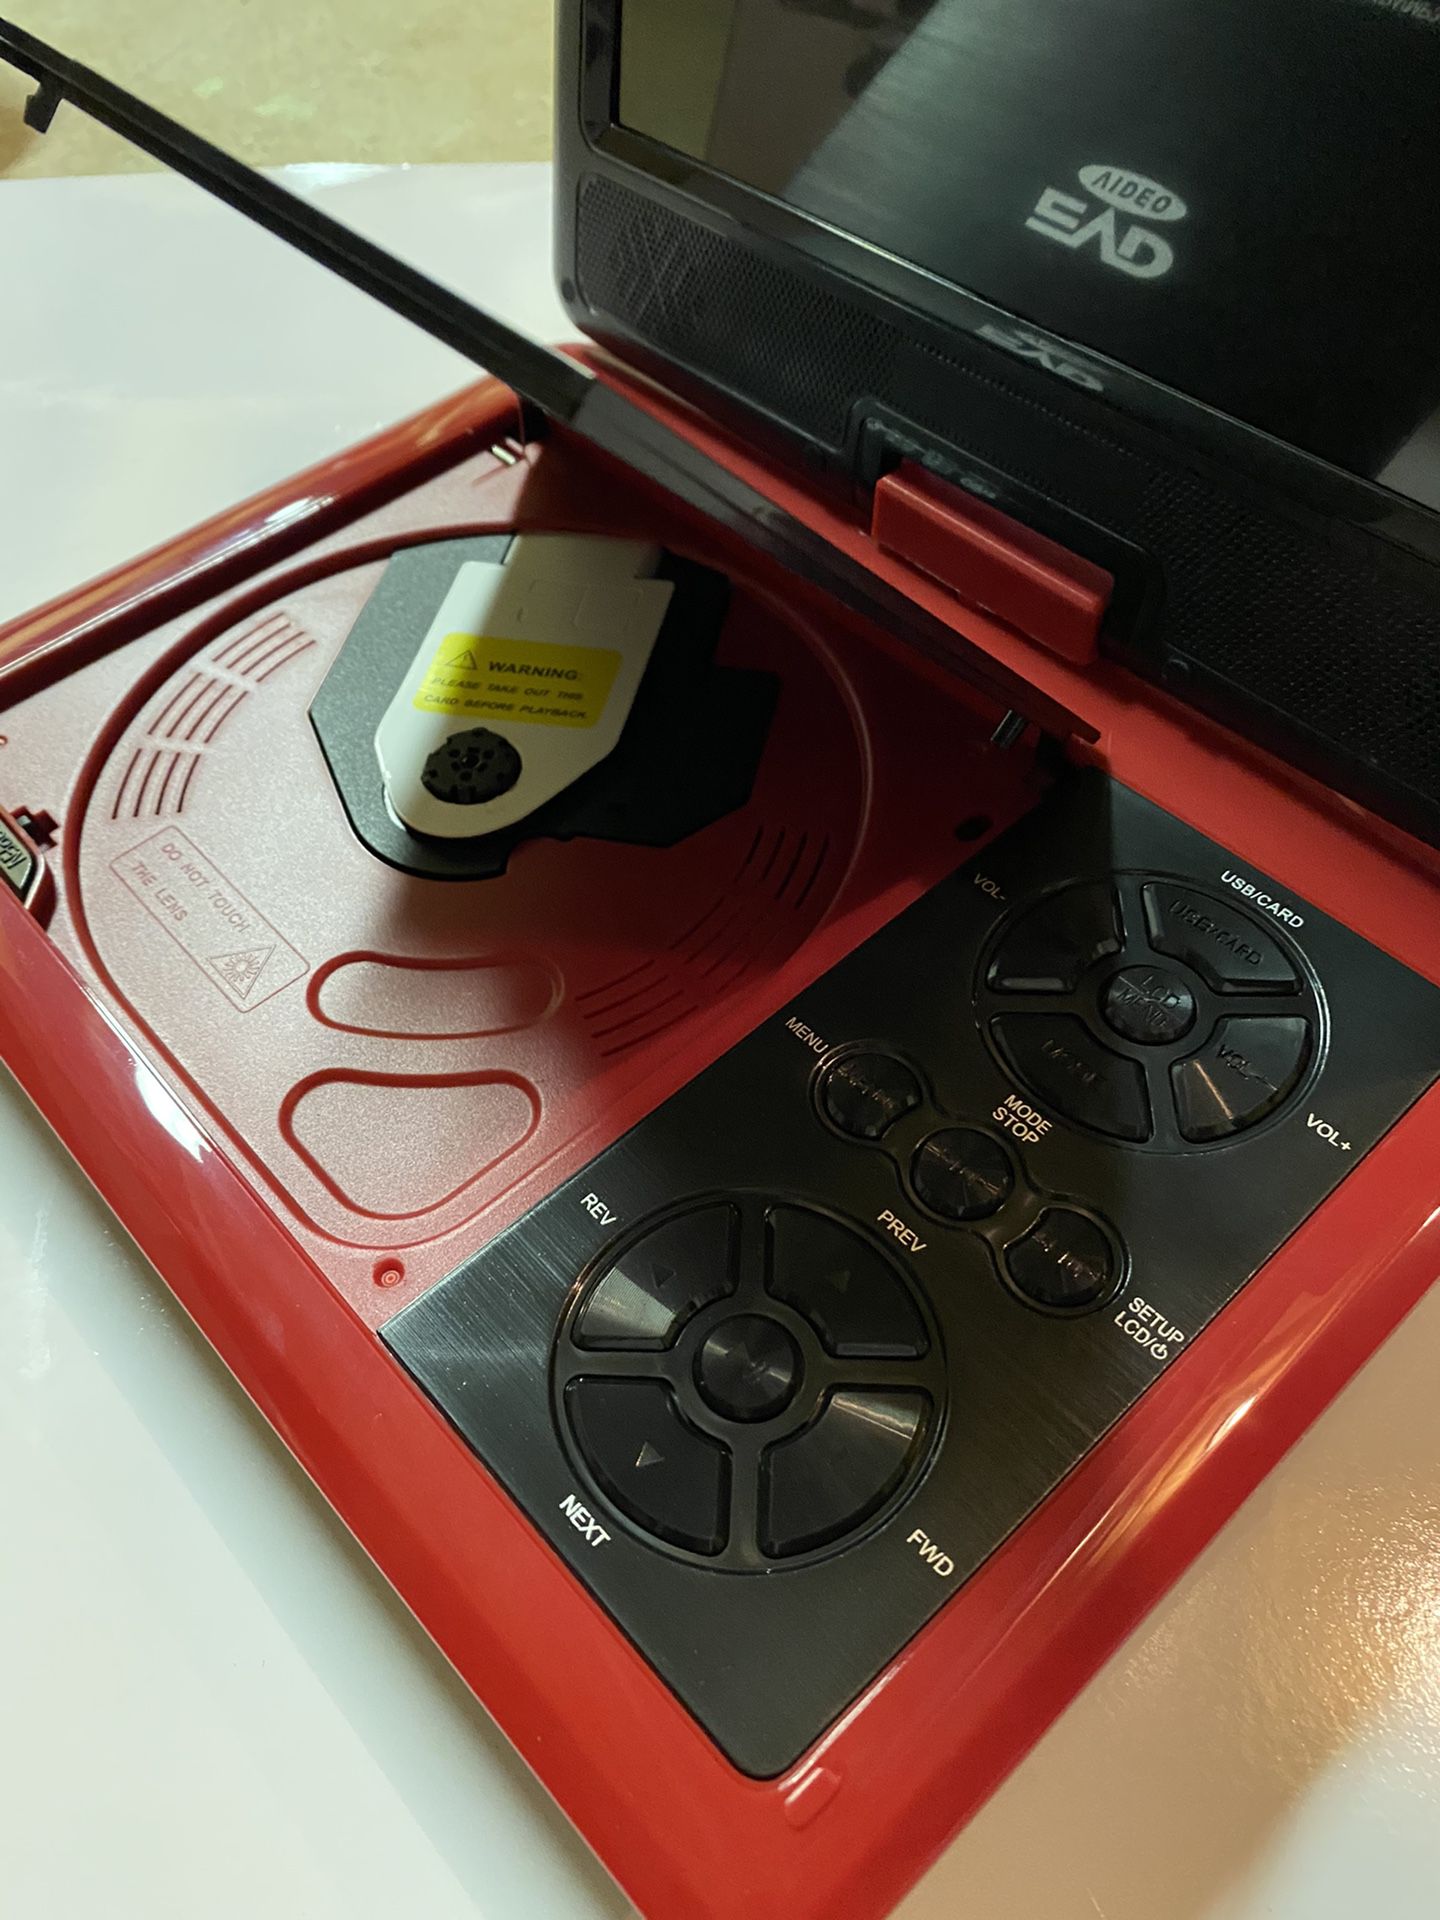 Portable DVD player in red, 9.8” screen